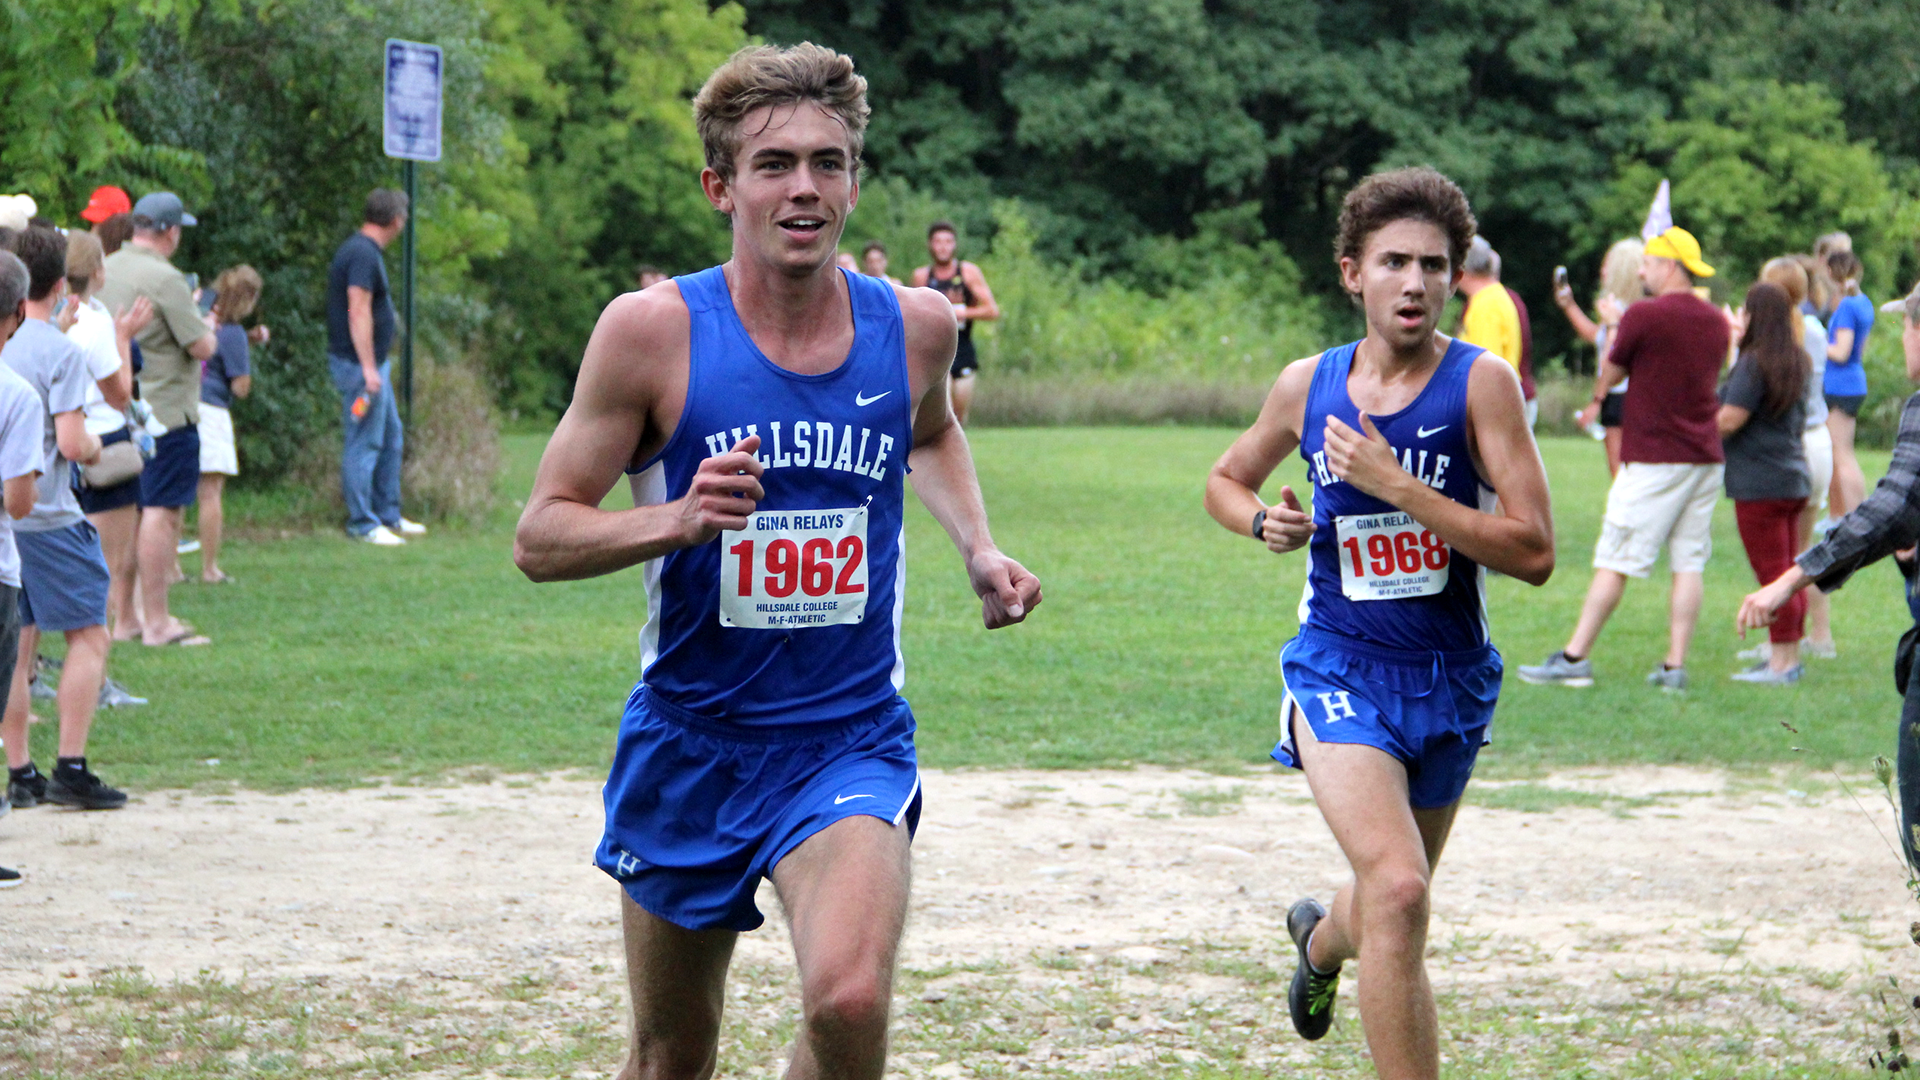 Charger men finish third in season-opening home invitational